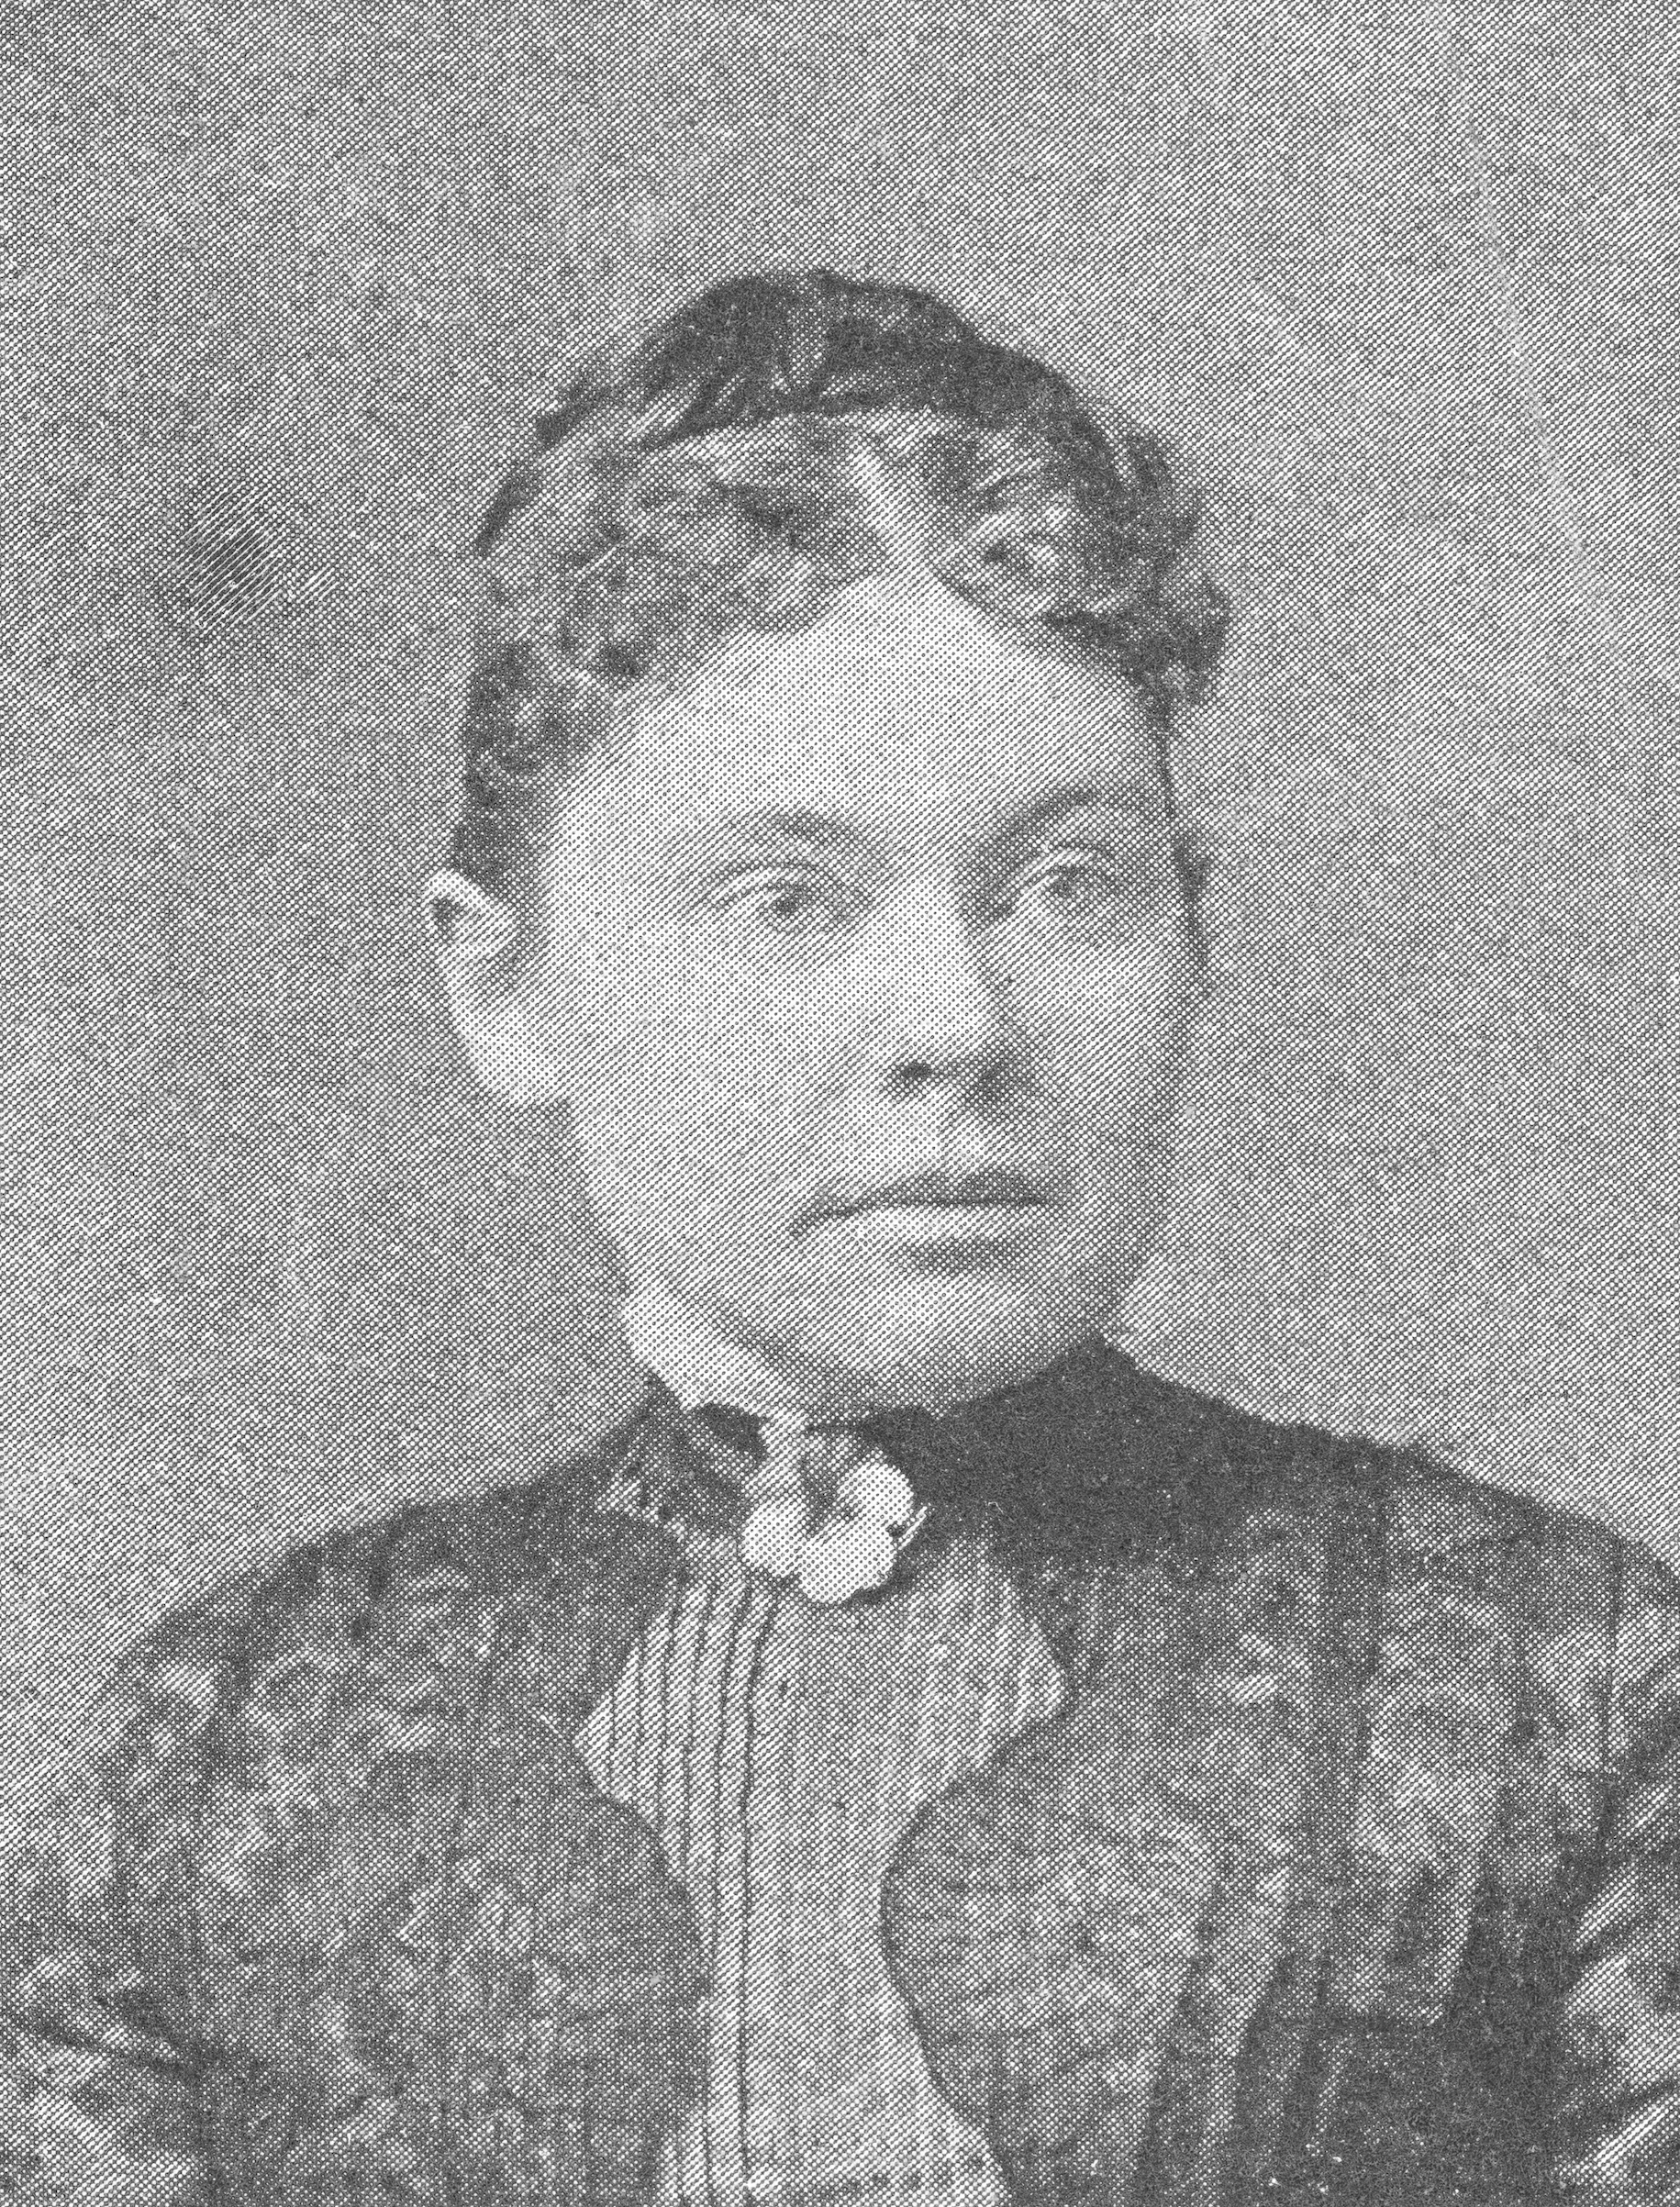 In June 1893 Lizzie Borden stood trial, later acquitted, for killing her father and stepmother with an ax. (Bettmann/Getty Images)